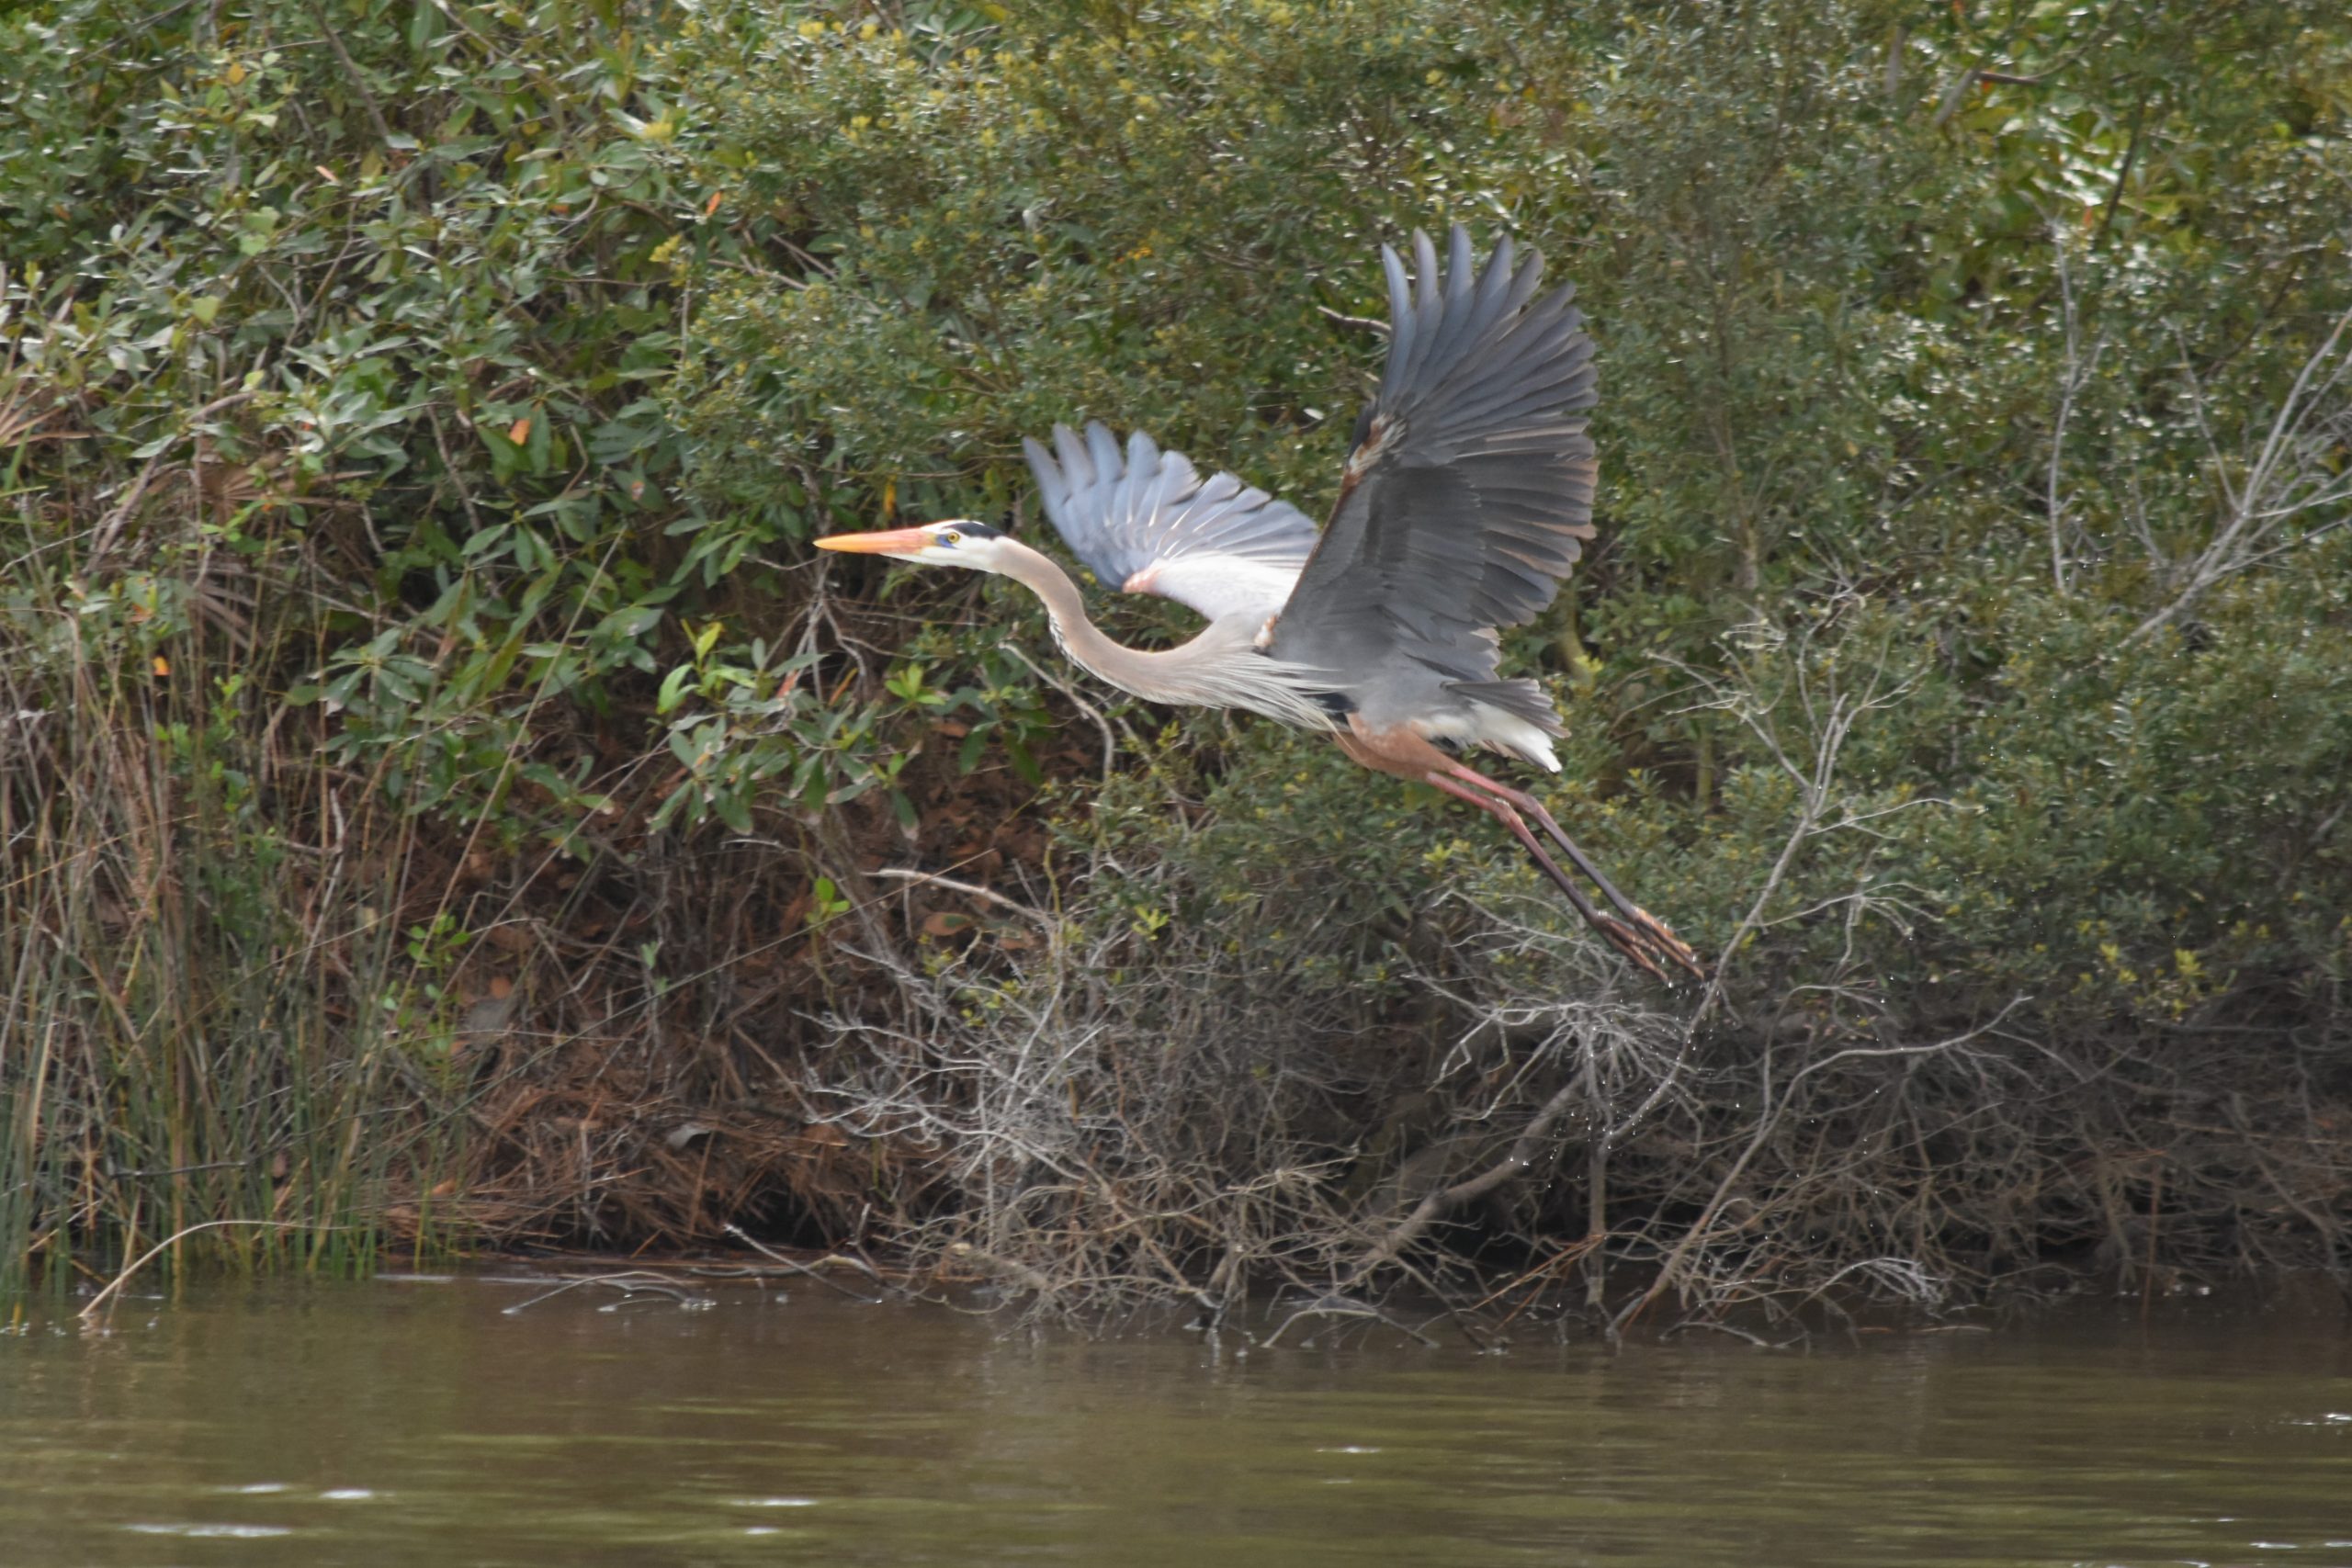 Blue heron, photographed by Sister Victoria in March 2019 while she was staying at the Mercy vacation home in Gulf Shores, Alabama.